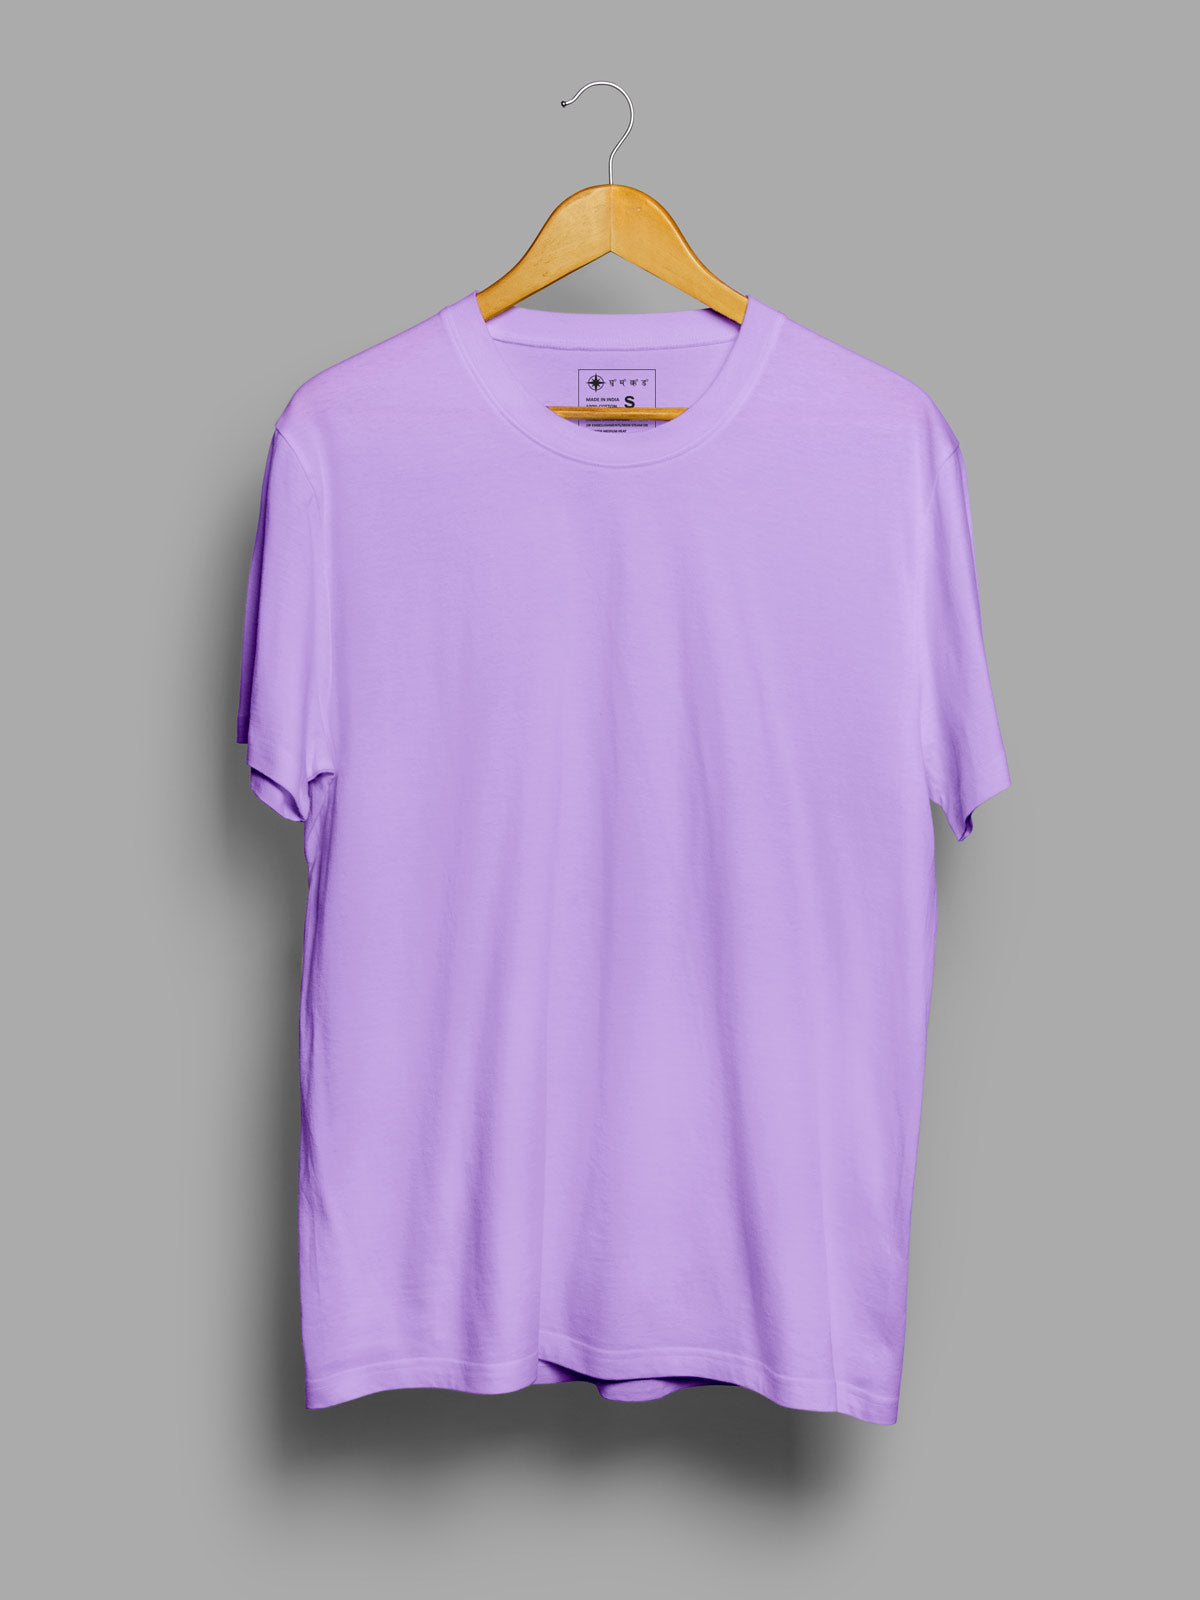 Pack of 3 | Yellow, Lavender & Coffee Brown Unisex Plain T shirt